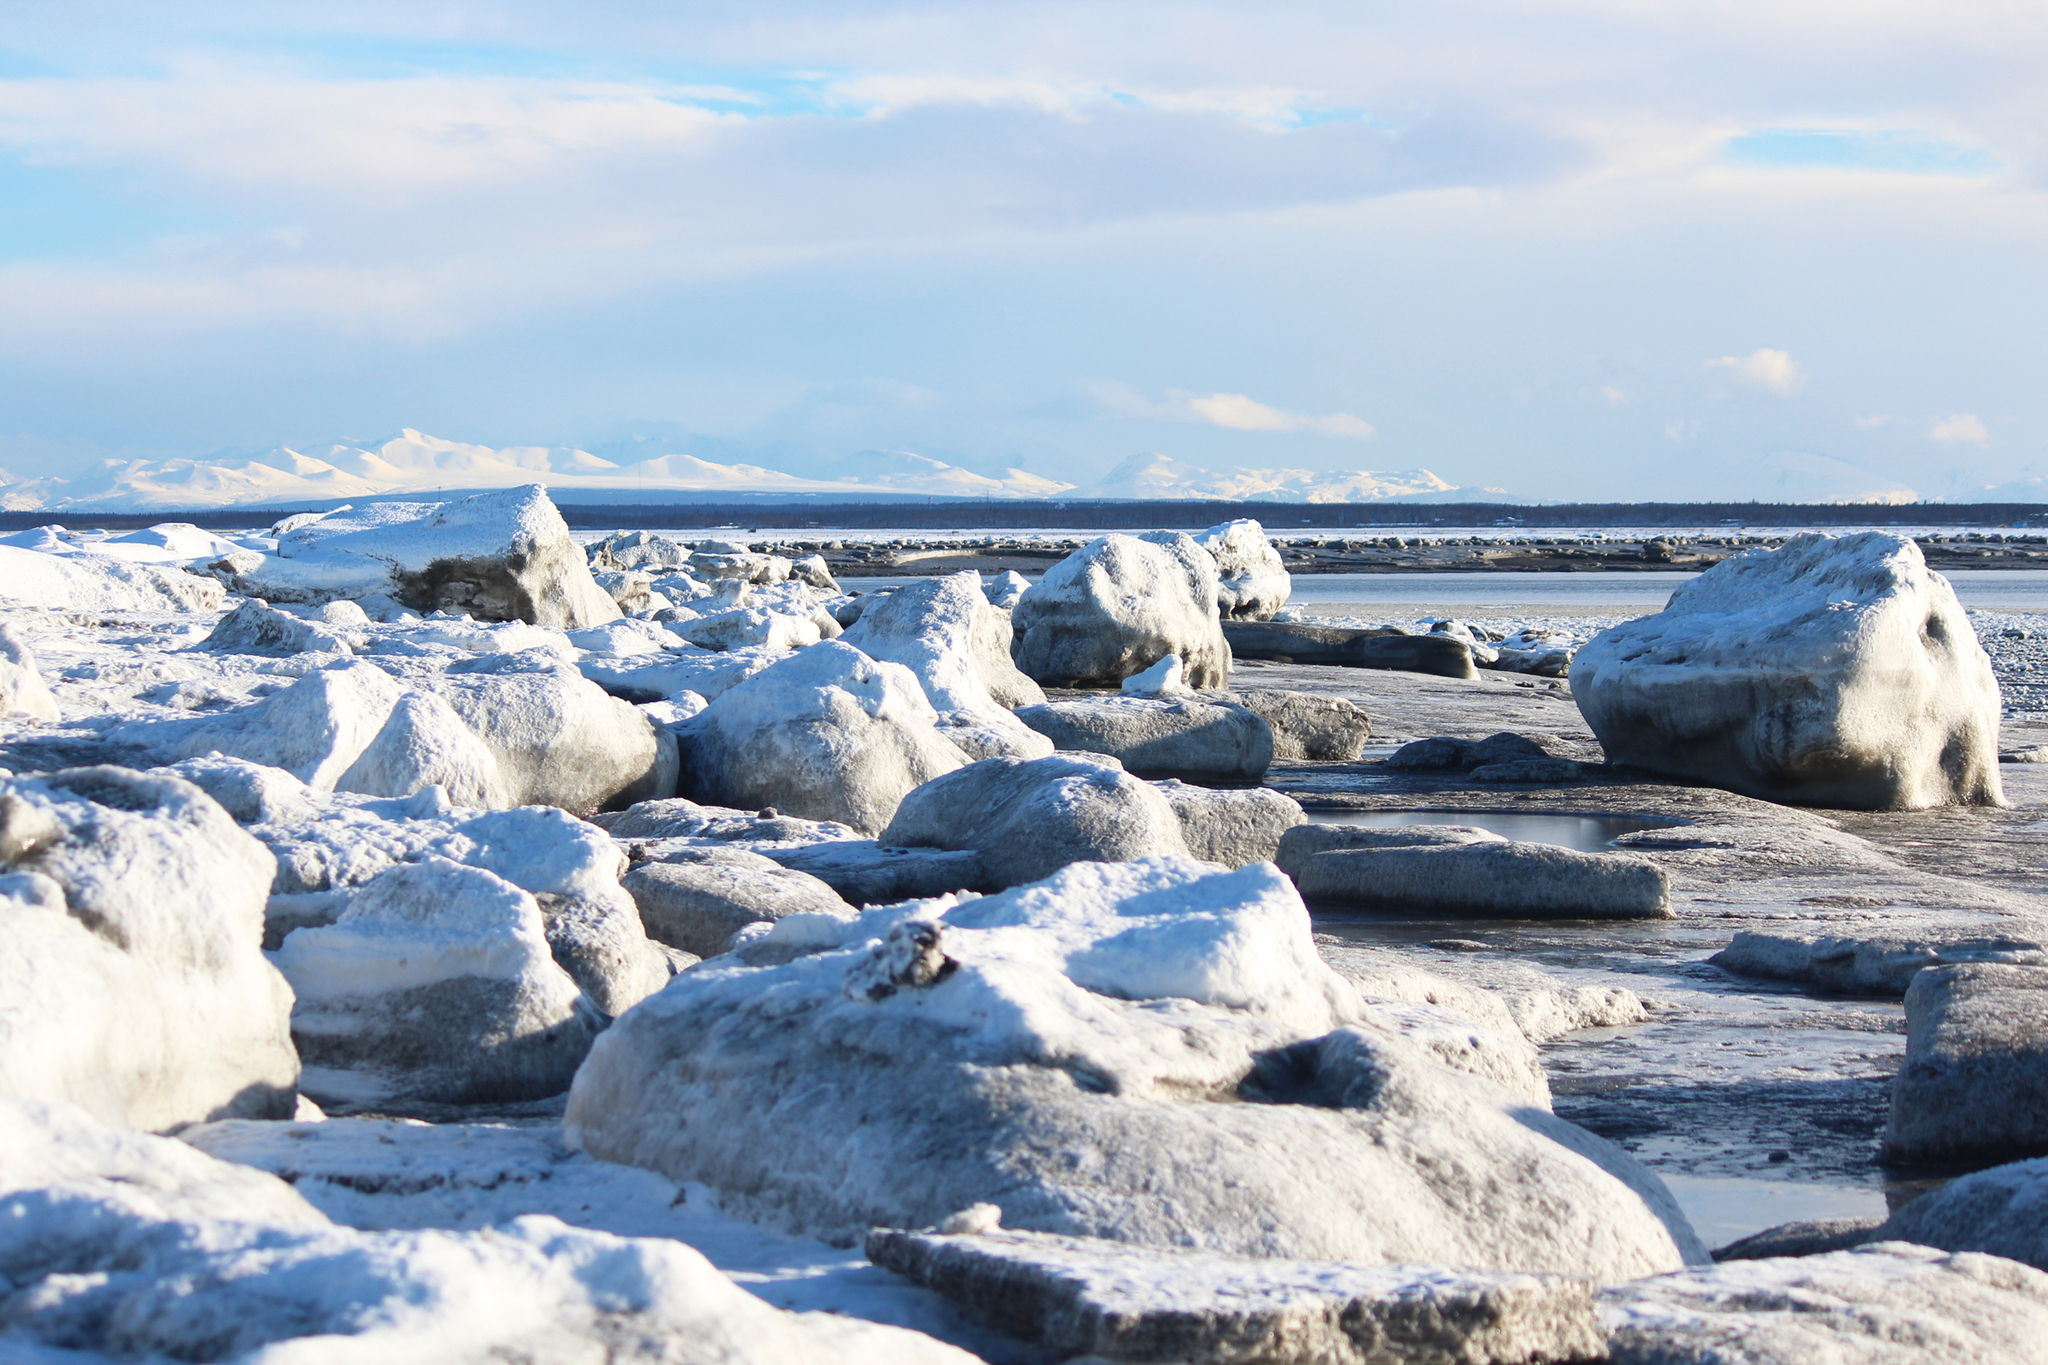 Chunks of frozen ice and sand line the beach at the mouth of the Kenai River on Wednesday, Feb. 15, 2017 in Kenai, Alaska. Kenai has been in a warm spell this week, with a high near 36 degrees on Wednesday afternoon. Warm weather is expected to continue, with highs in the 30s through Friday, according to the National Weather Service. (Megan Pacer/Peninsula Clarion)